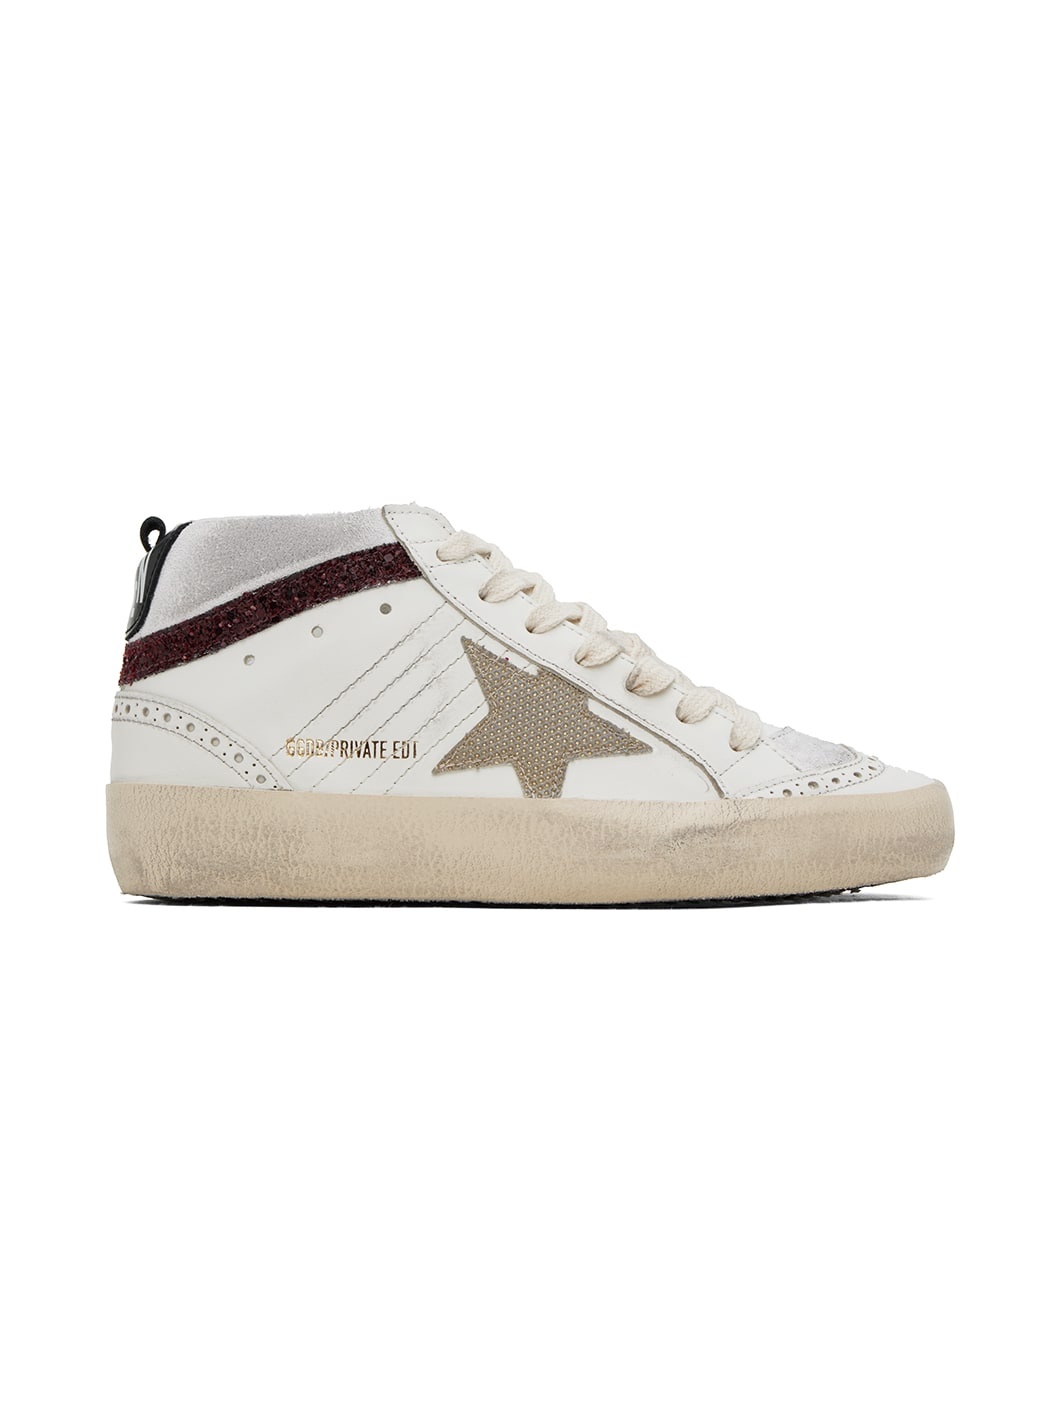 SSENSE Exclusive White Mid Star Sneakers - 1